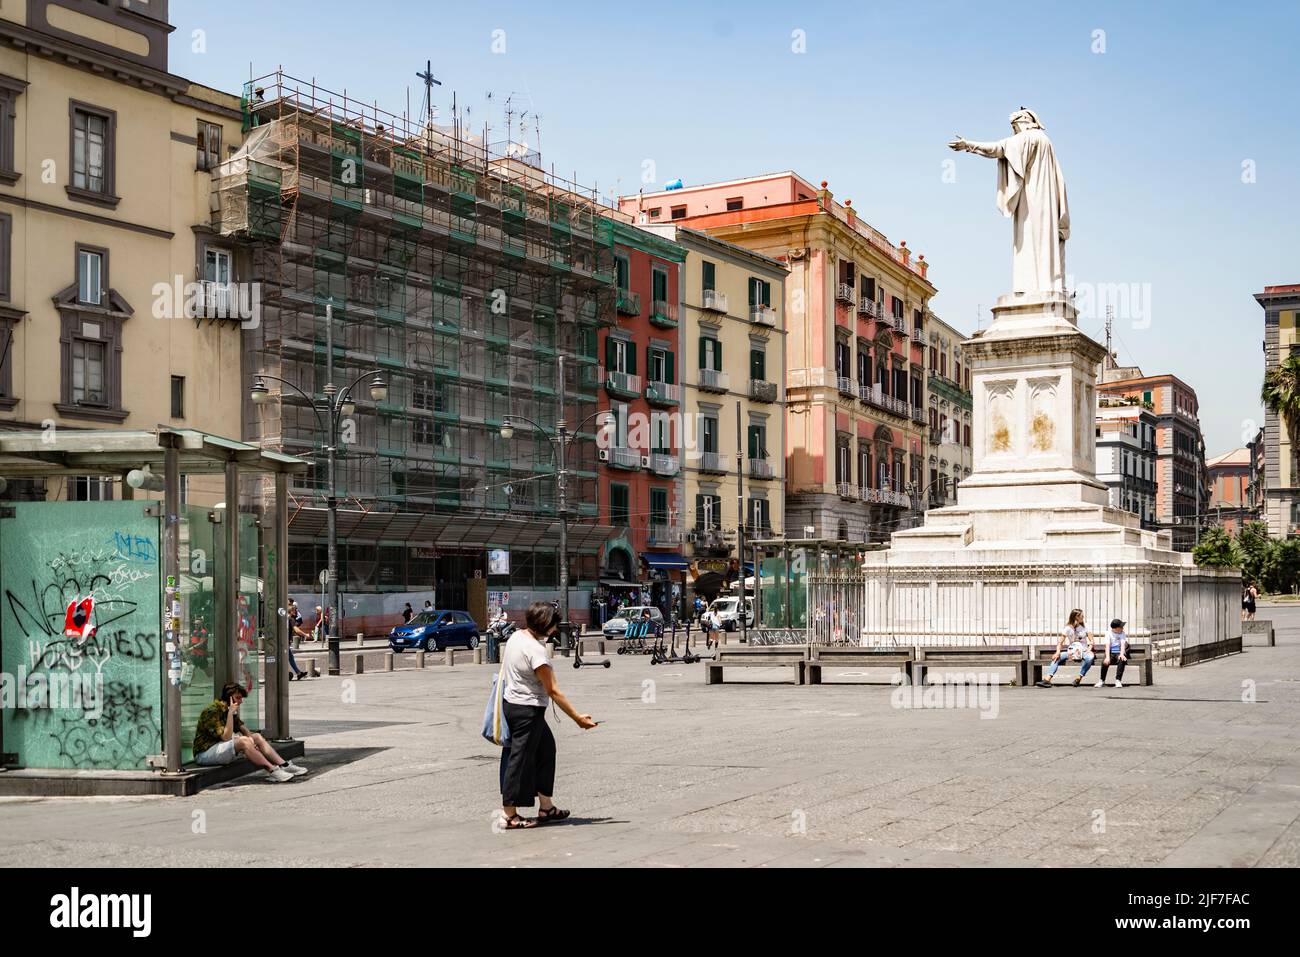 Piazza Dante is a large public square in Naples, Italy, named after the poet Dante Alighieri. The square is dominated by a 19th-century statue of the Stock Photo